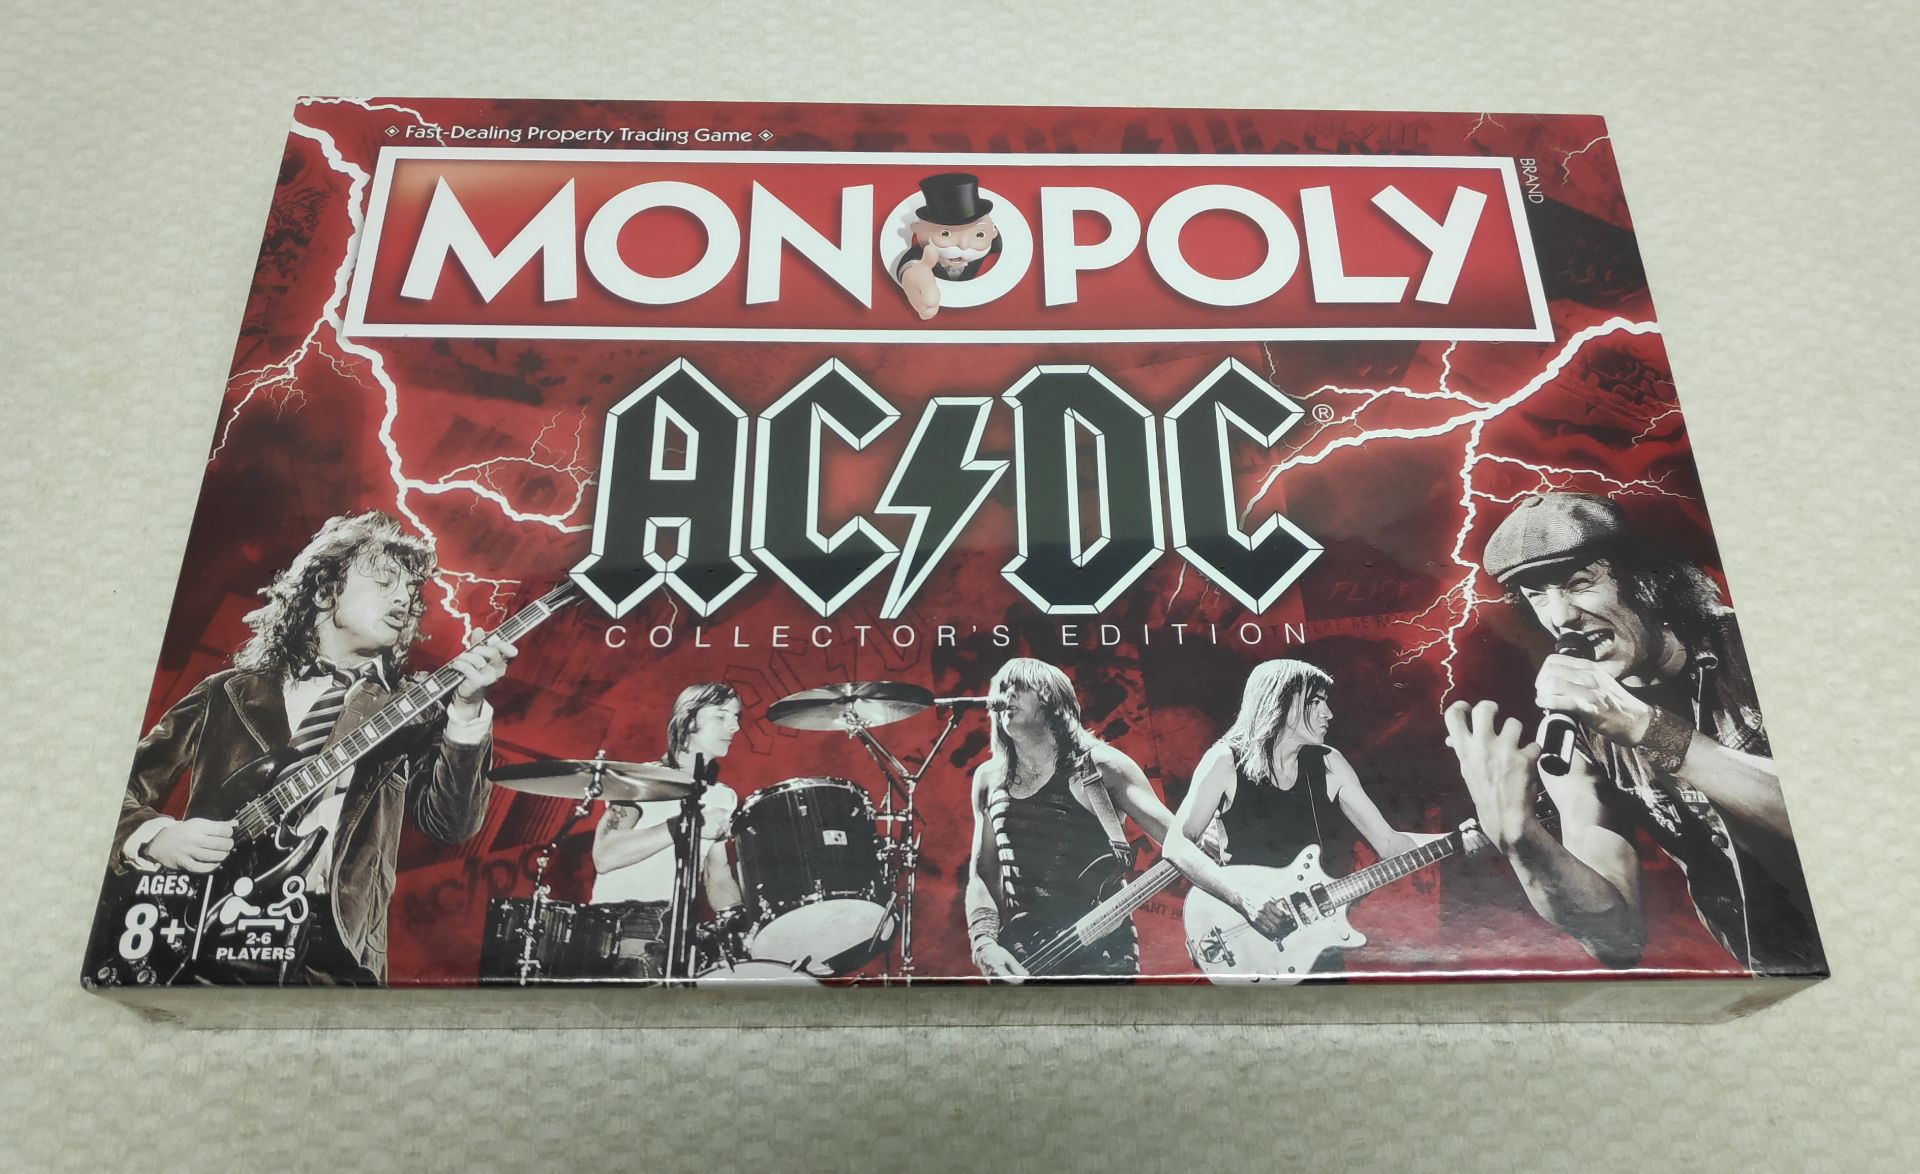 1 x AC/DC Collector's Edition Monopoly - New/Sealed - Image 6 of 8